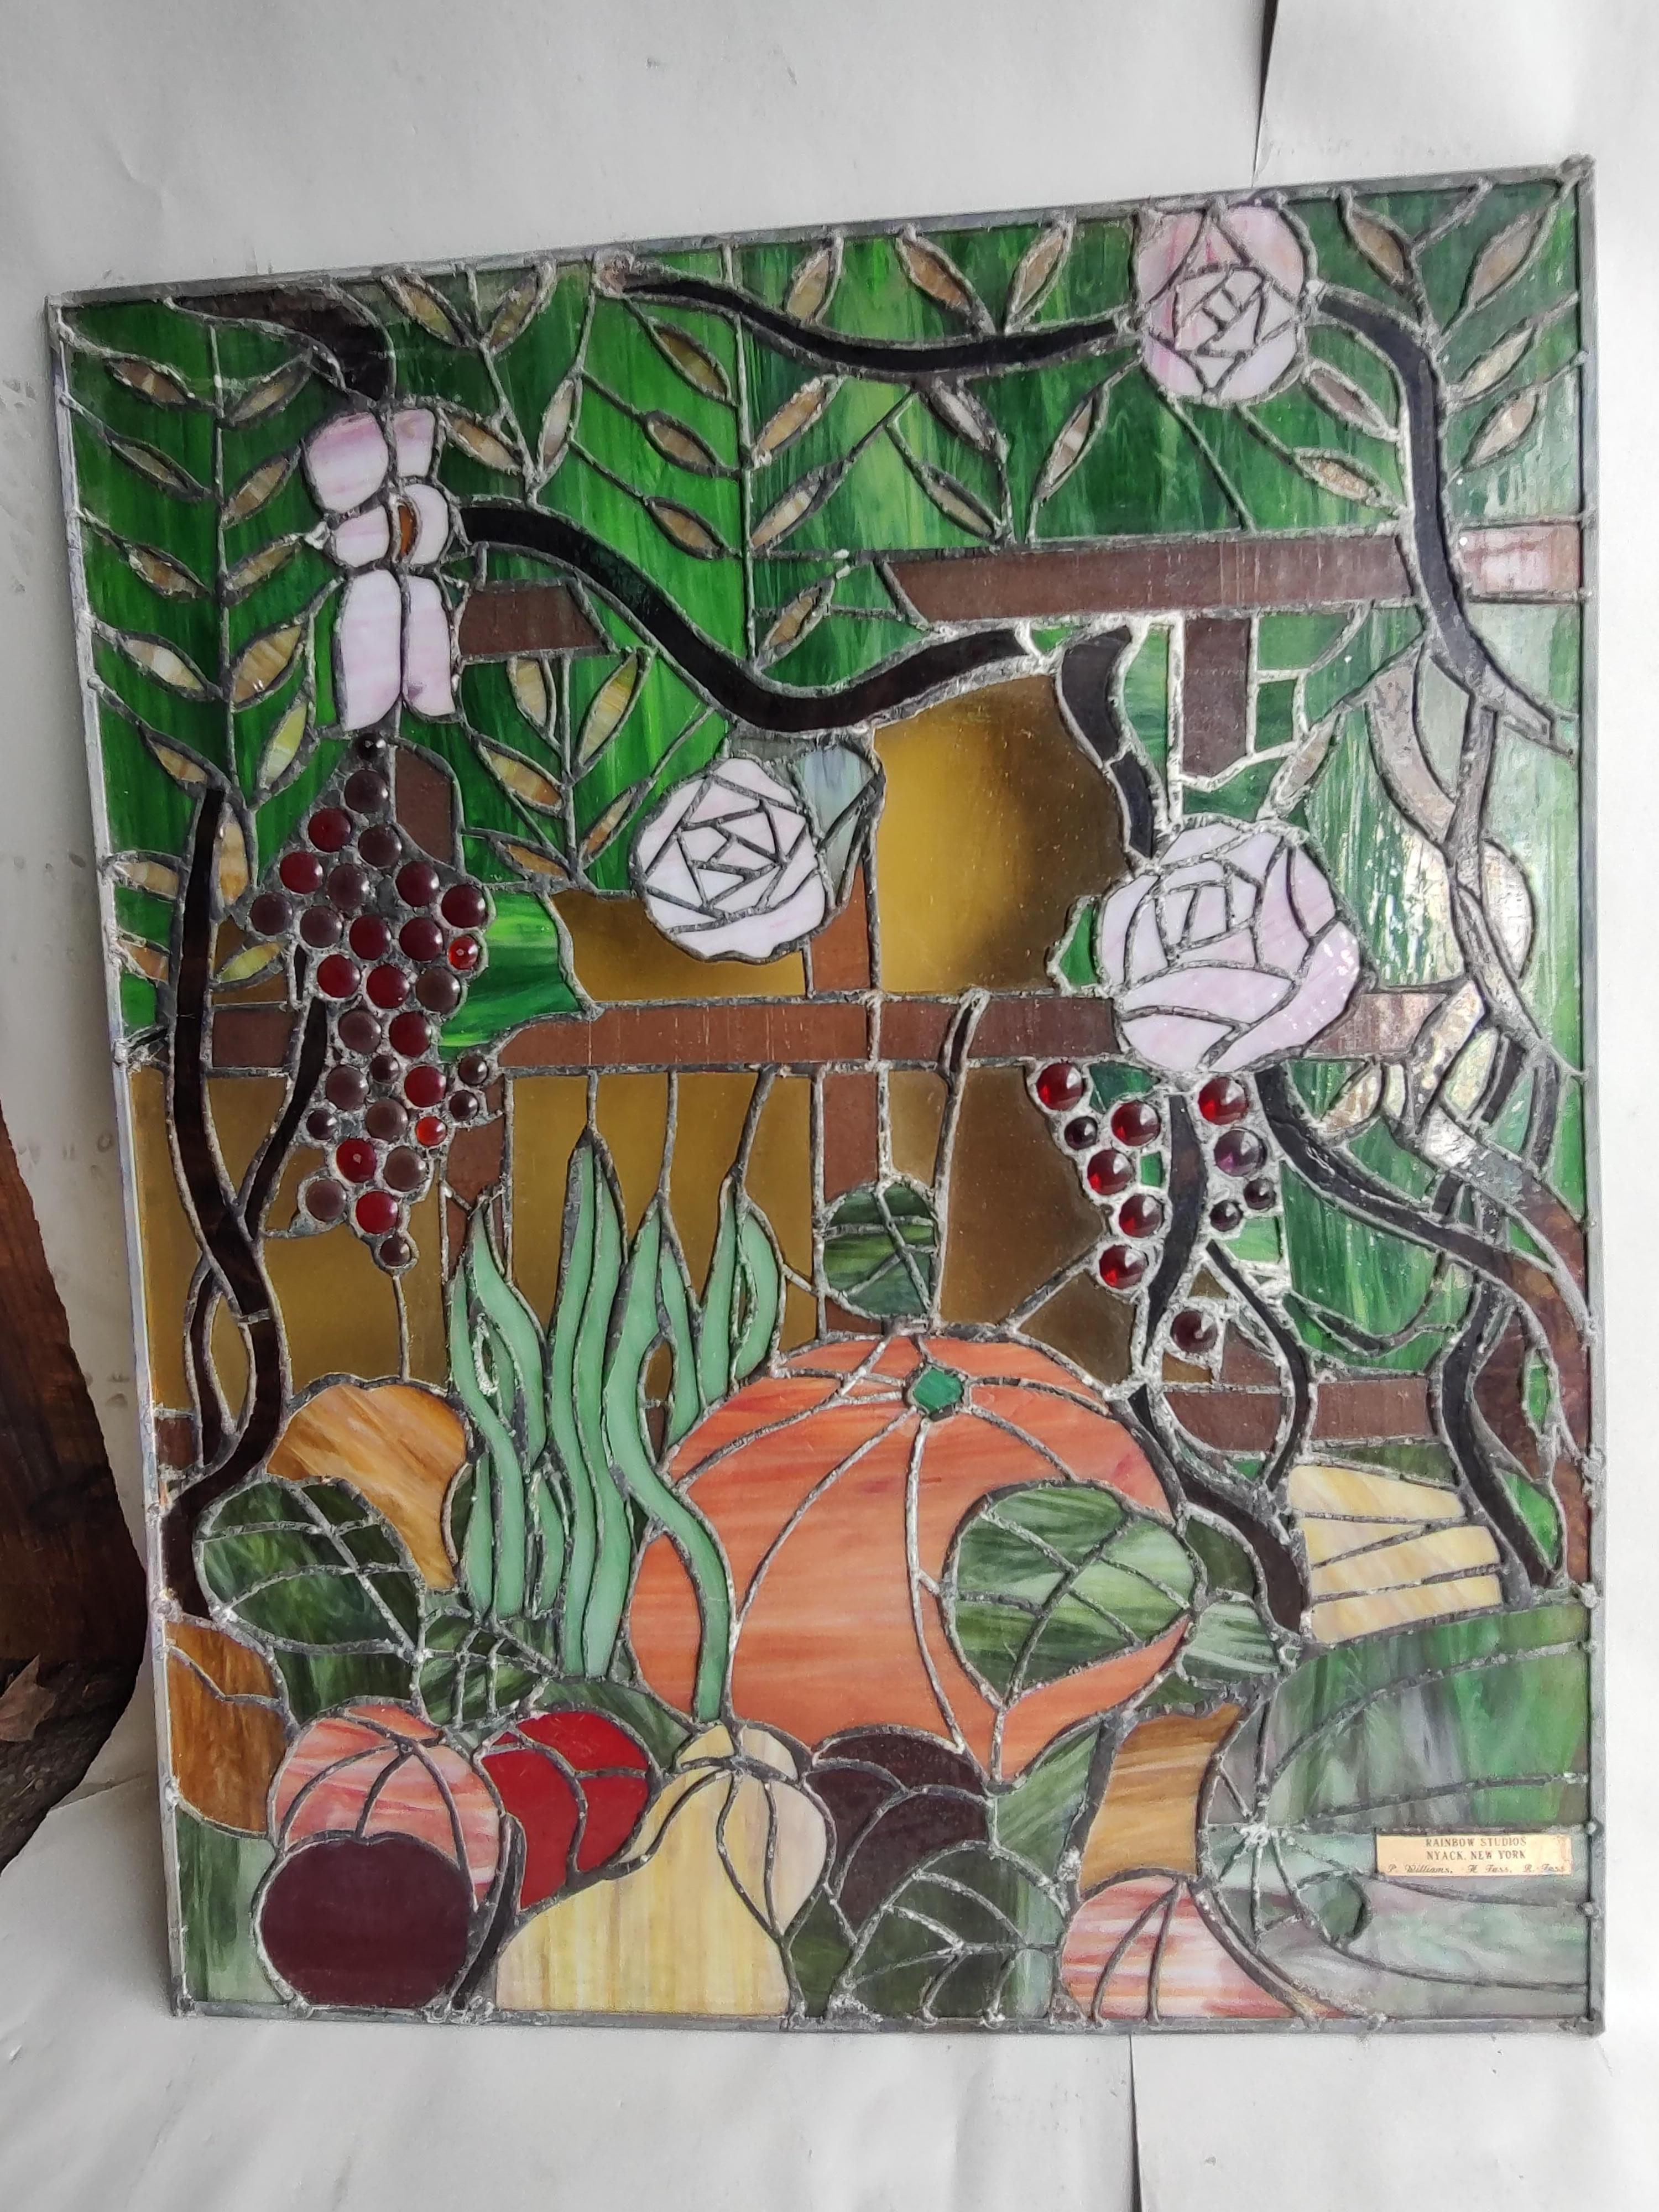 Hand-Crafted Midcentury Stained Glass Window Panels by Rainbow Studios NY, circa 1965 #4